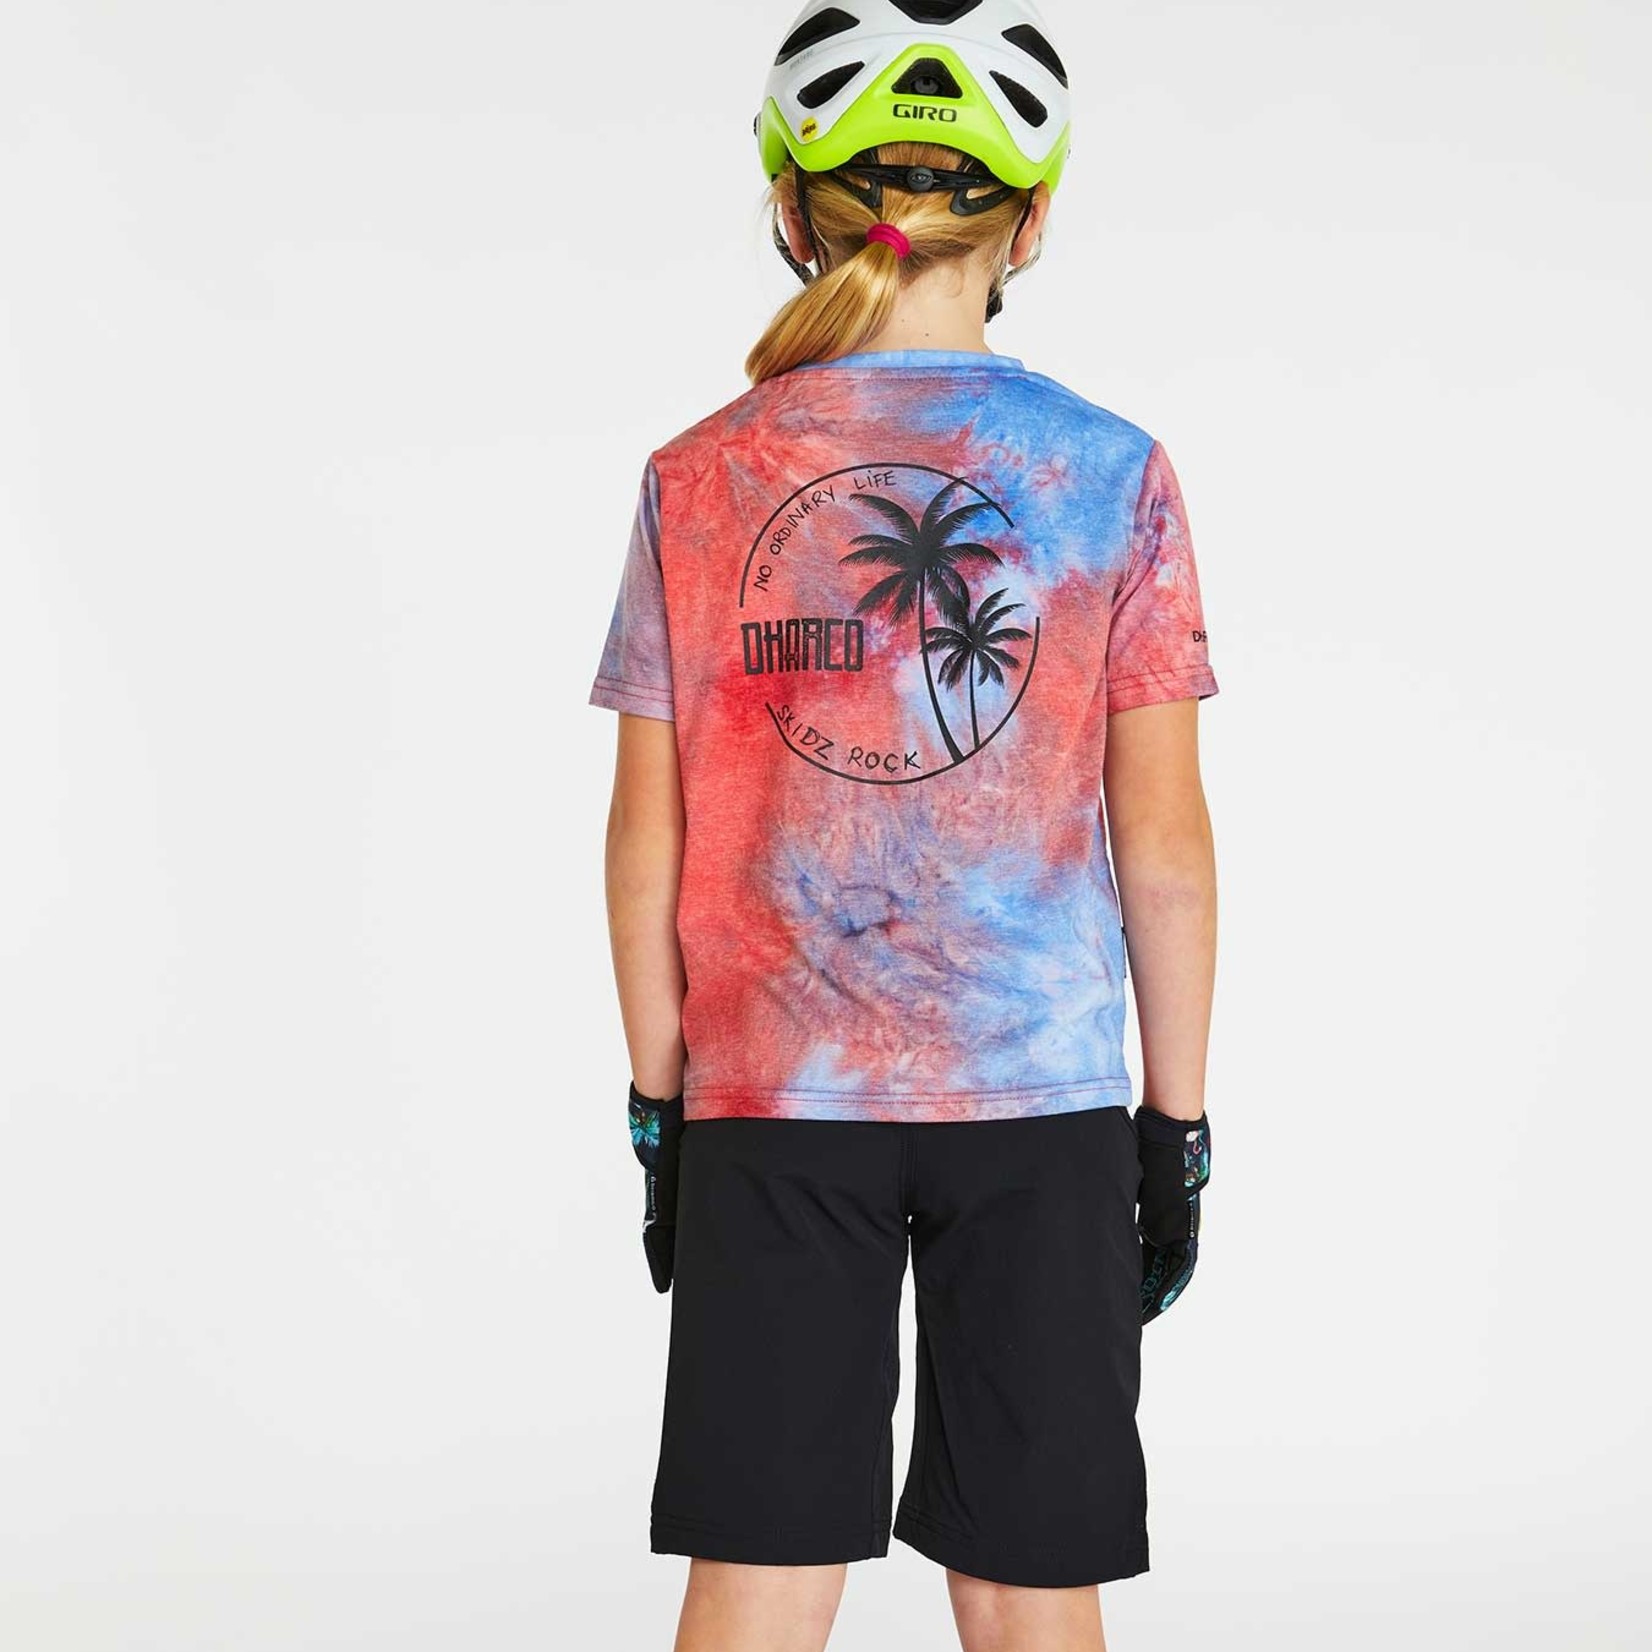 DHaRCO DHaRCO Youth Tech Tee Skids Rock YXL/12